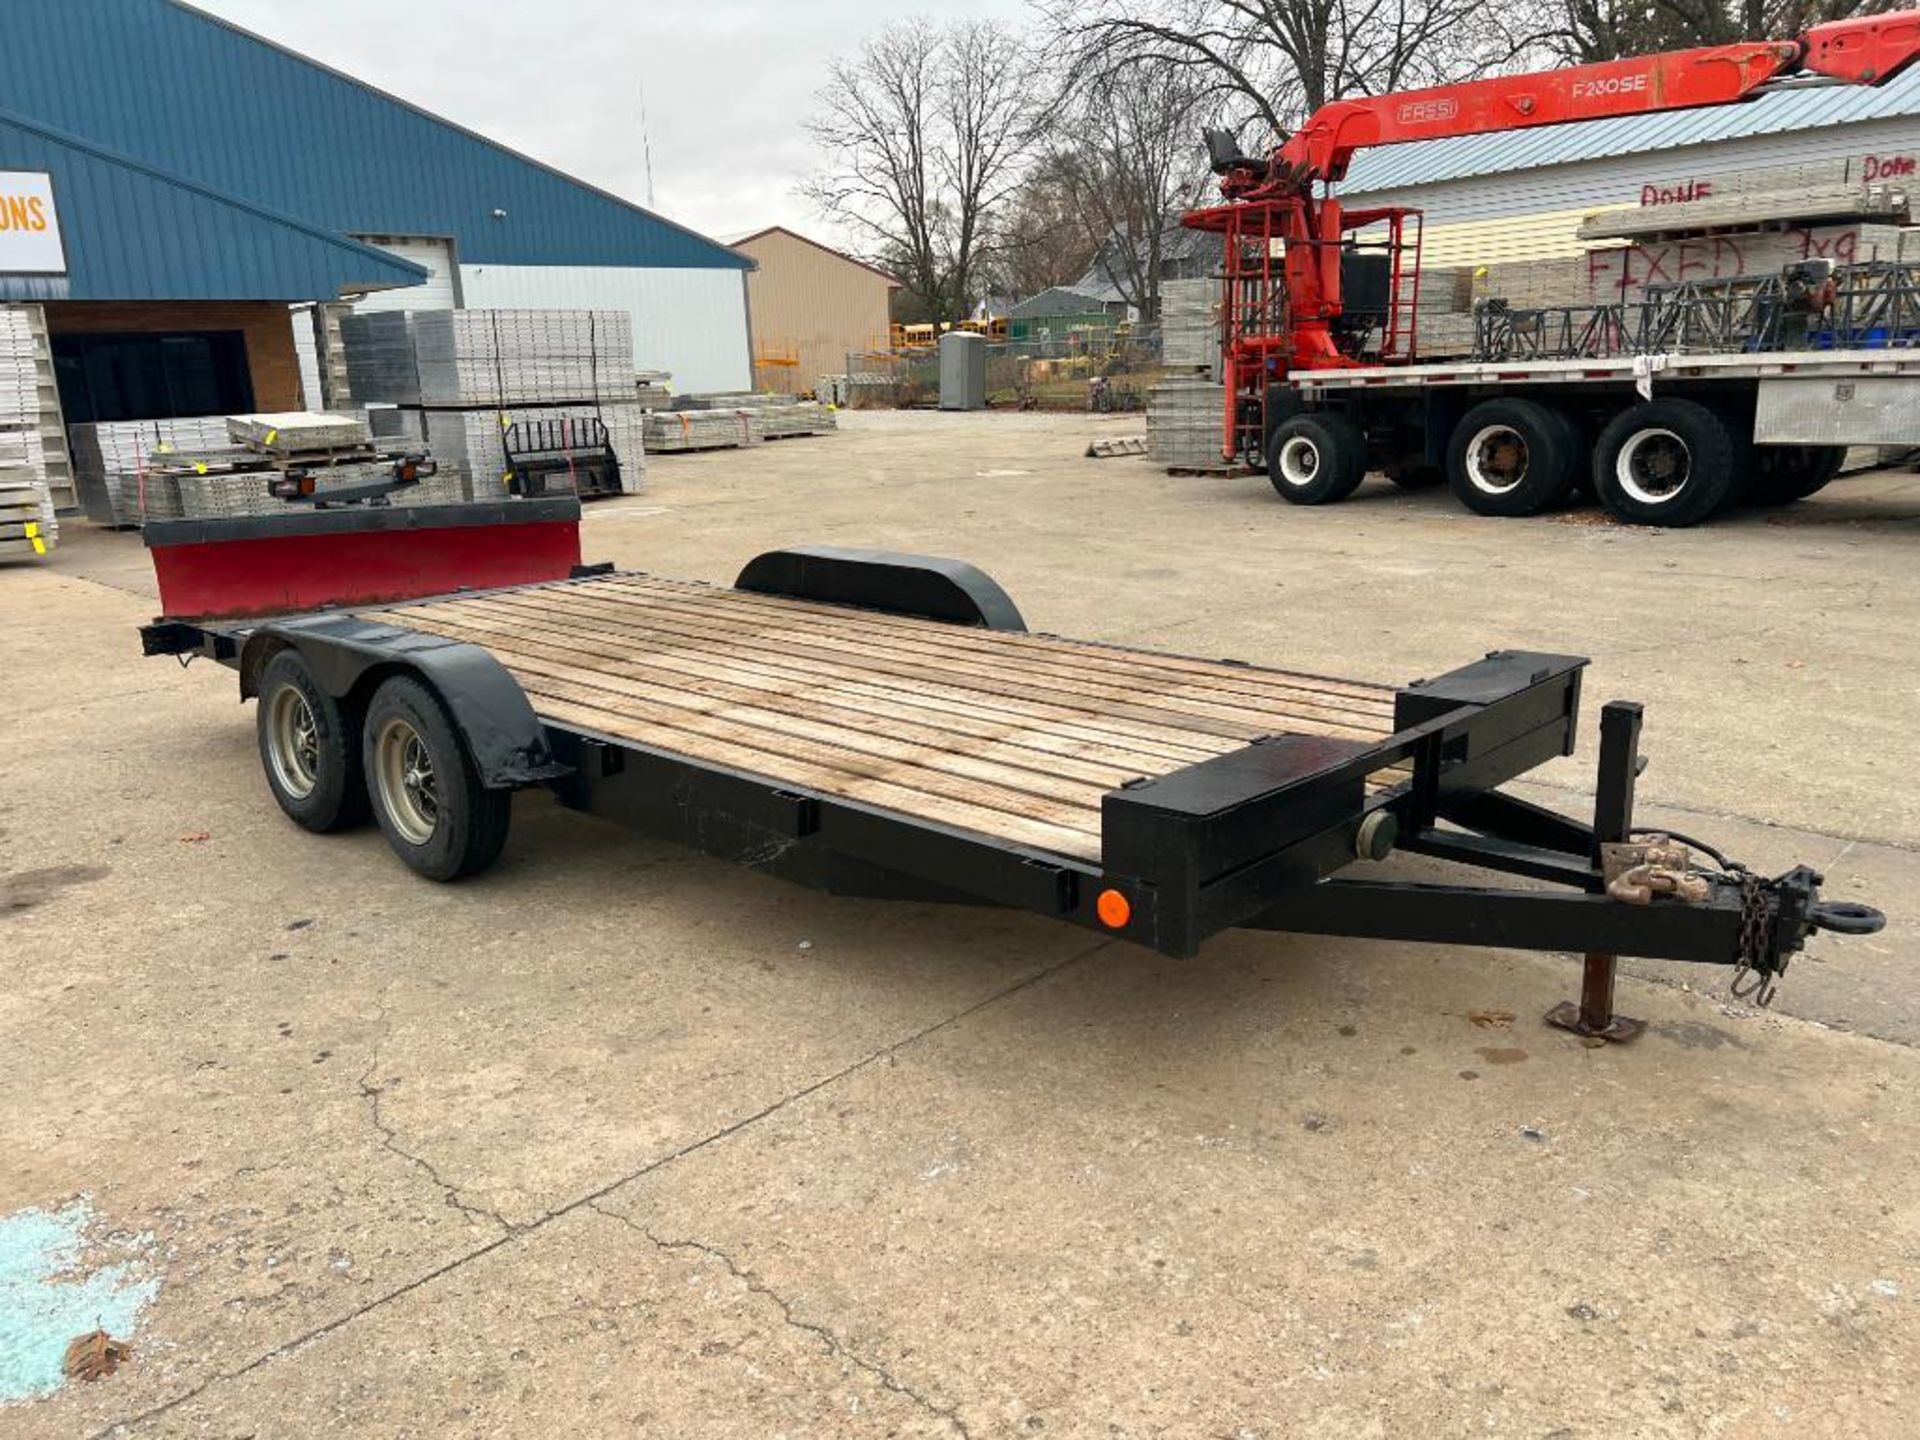 1999 Standard T/T Trailer, Tandem Axle, Registration Only, 18' x 83", Stake Pockets, 2 Toolboxes, Pi